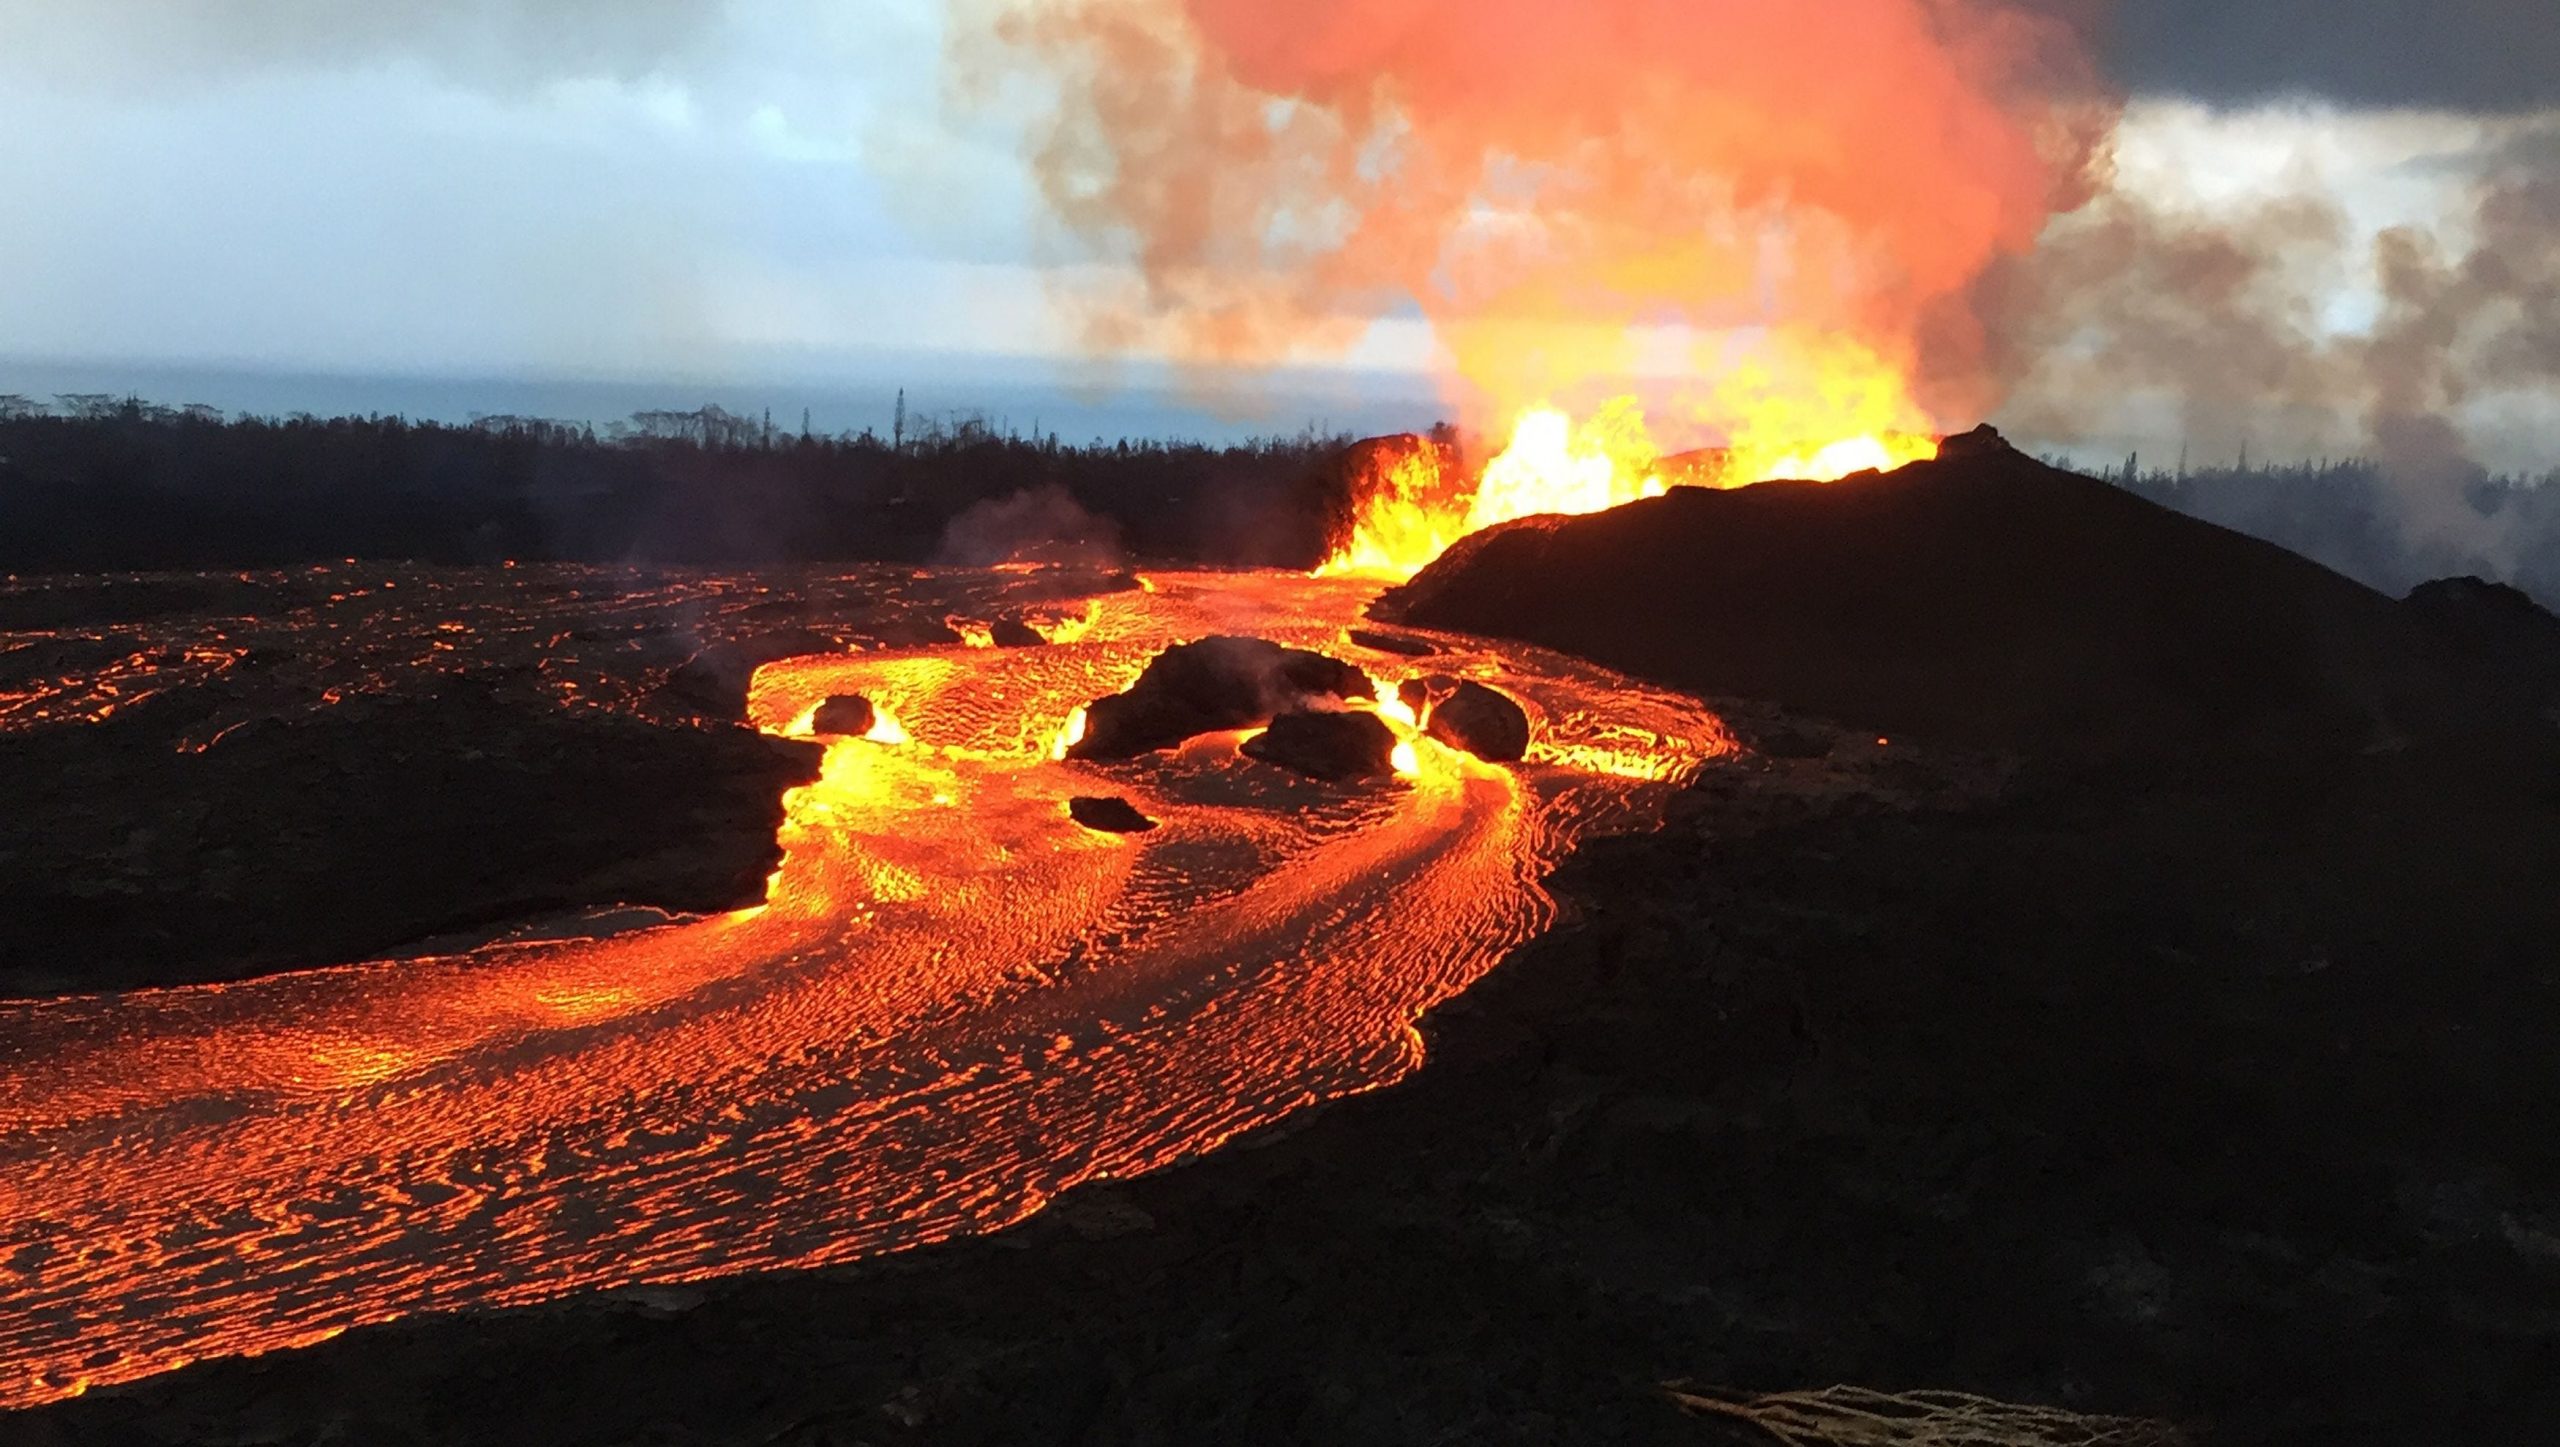 Kilauea - One of the World’s most active Volcanoes